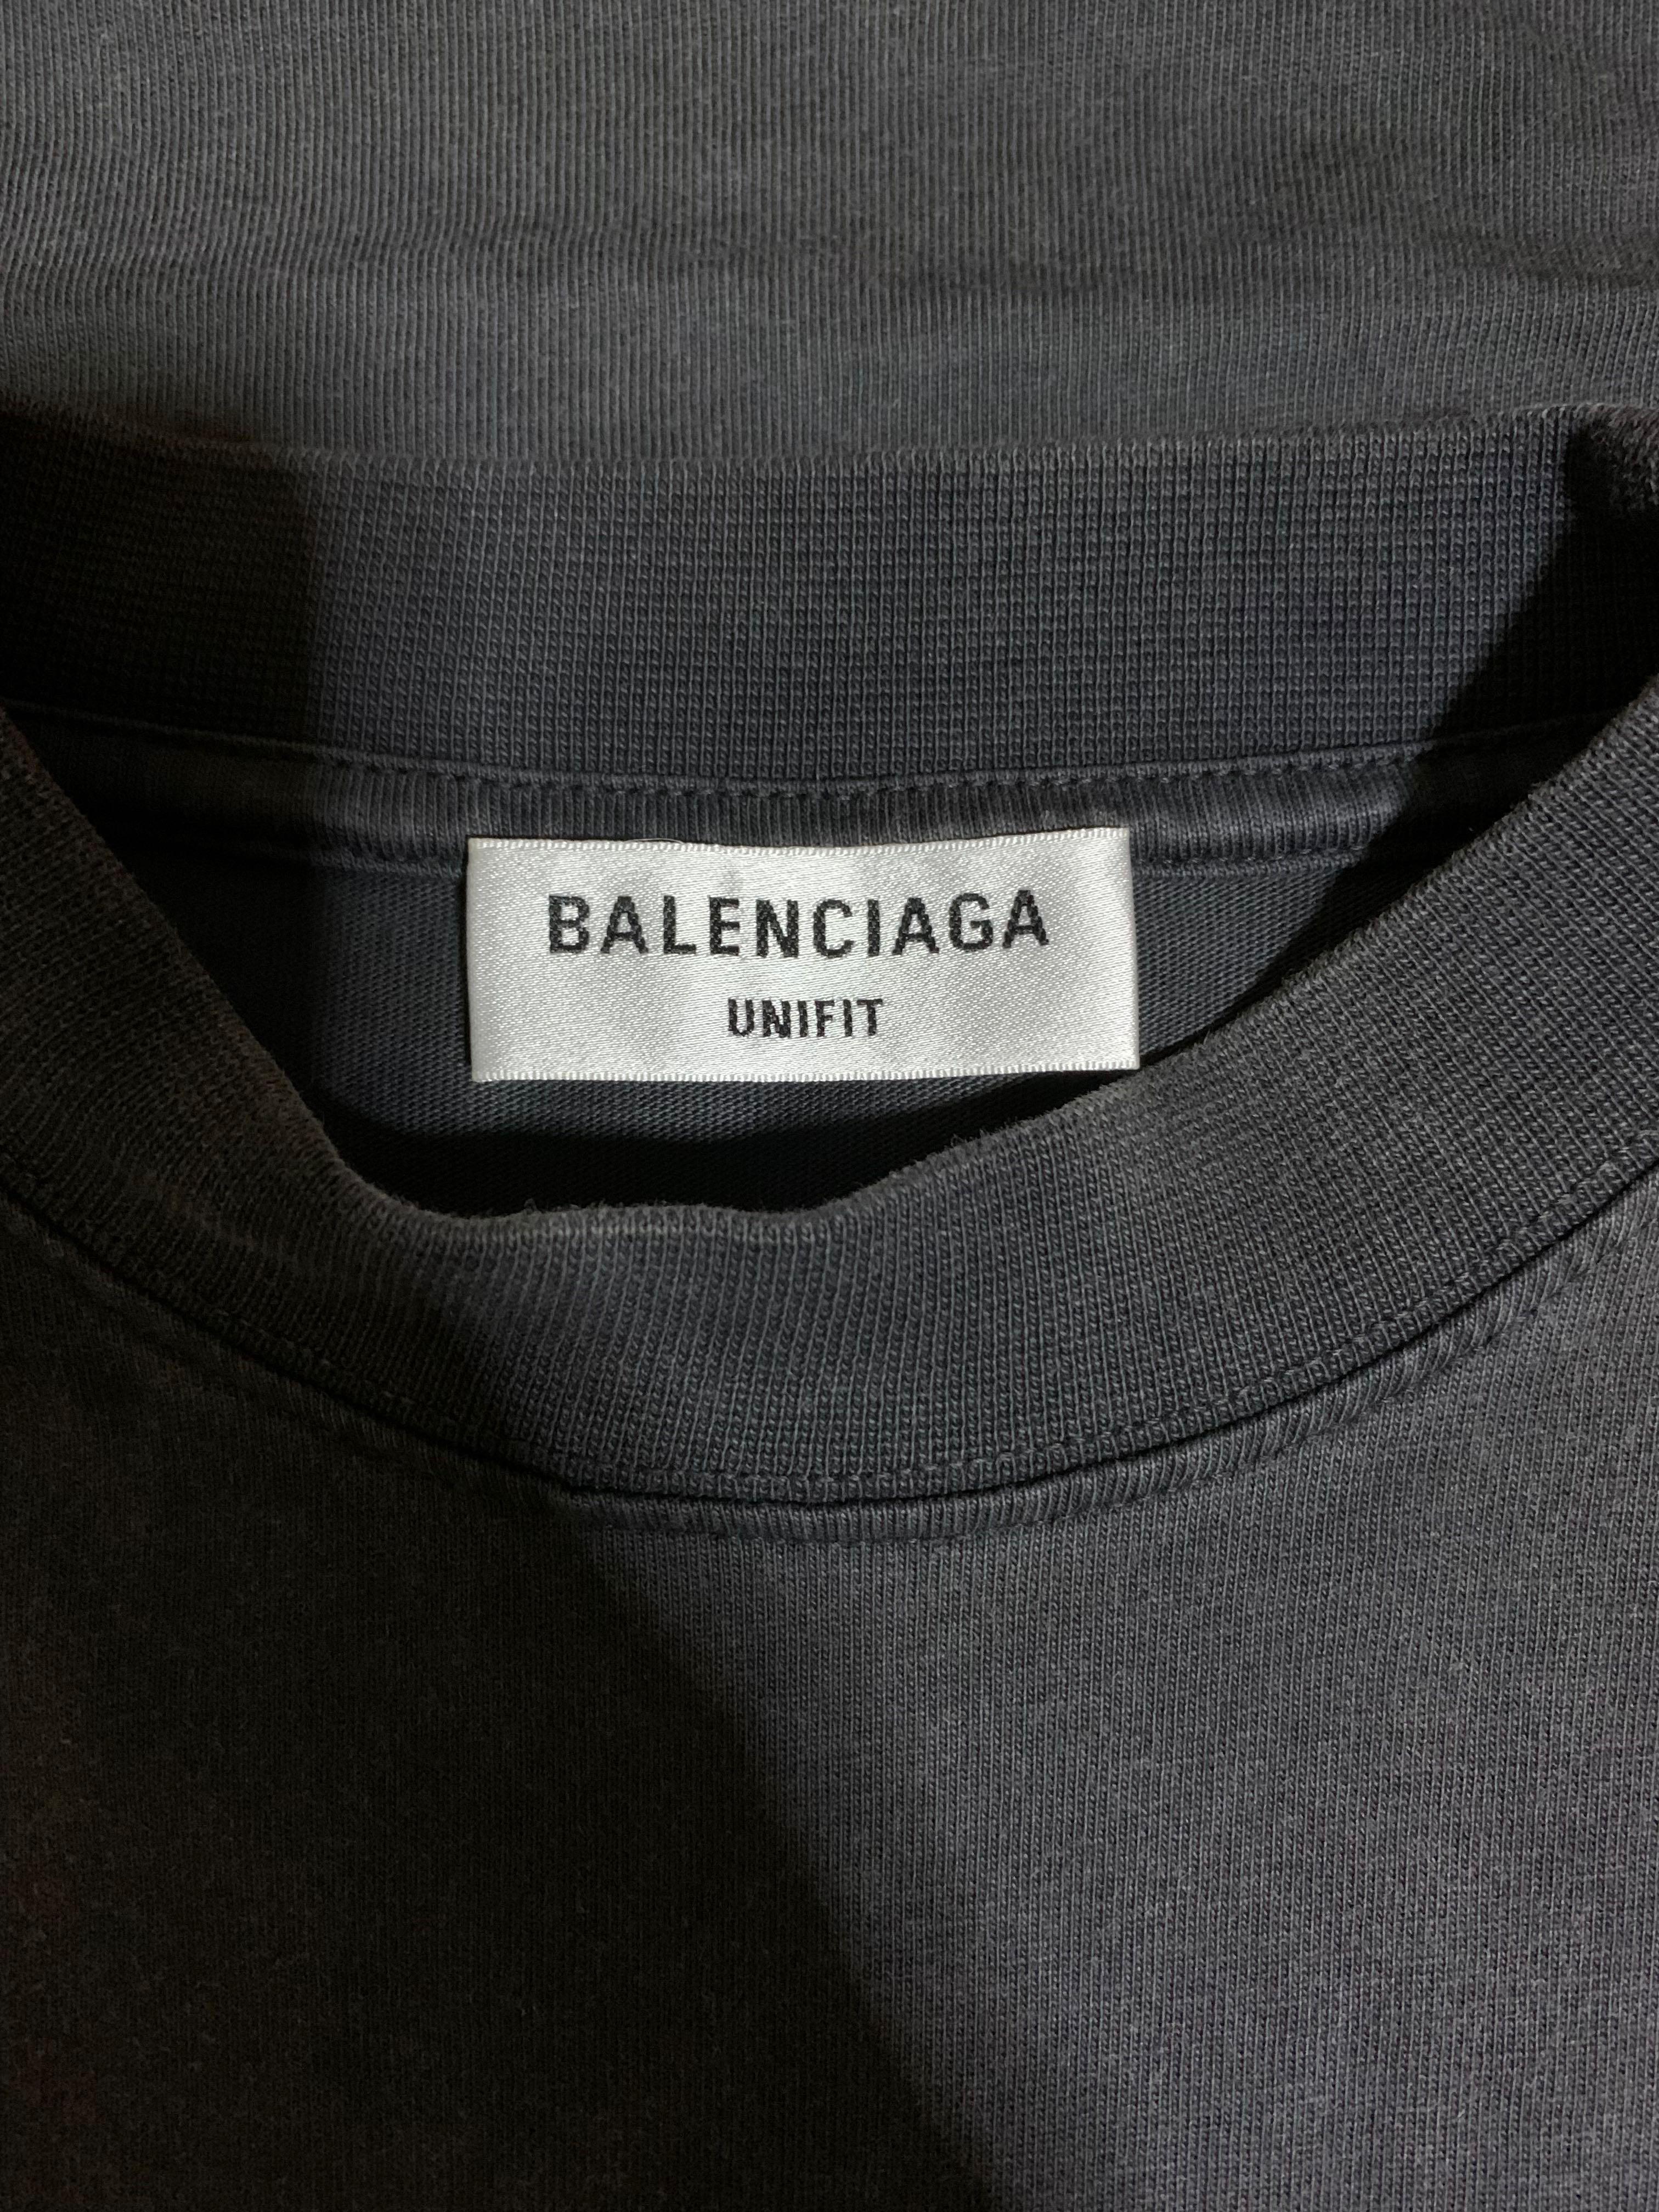 Balenciaga Authentic Jersey Apparel Hoodie, 44% OFF